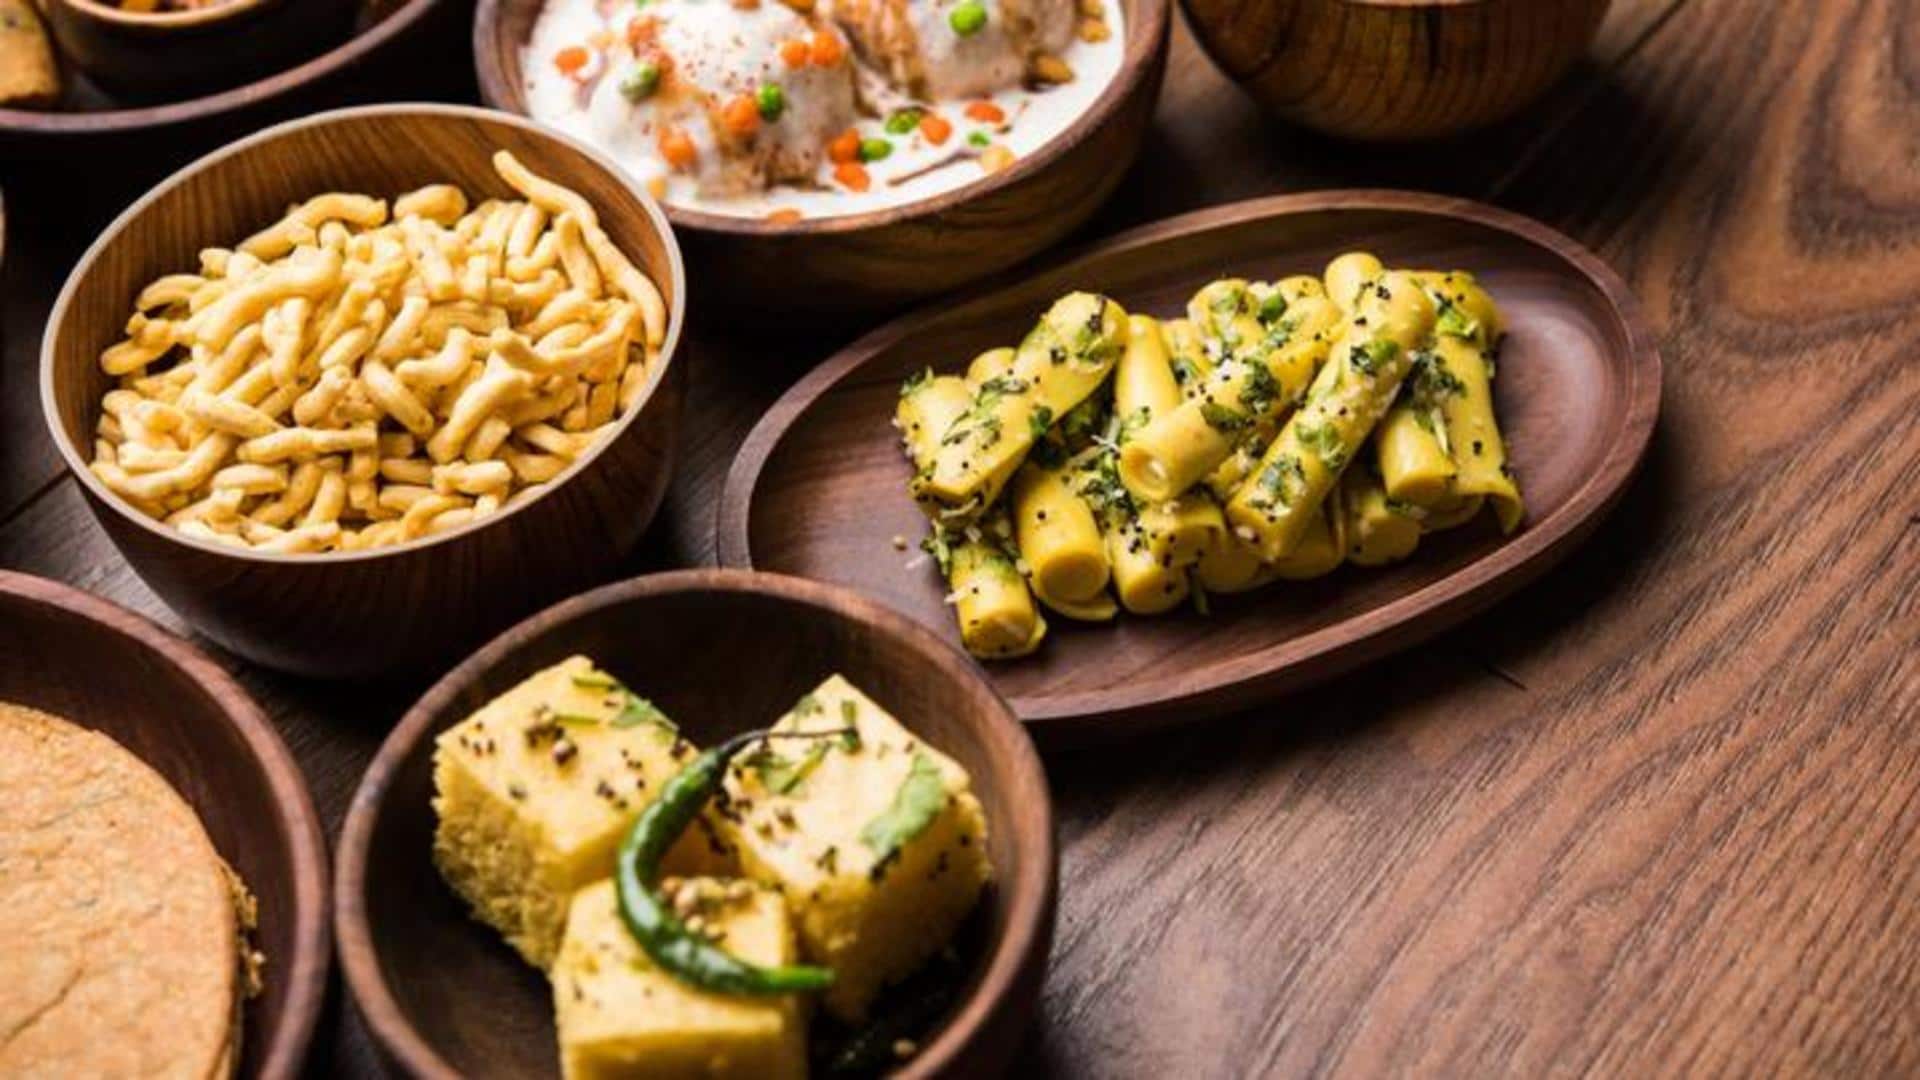 These simple Gujarati snack recipes can be tried at home